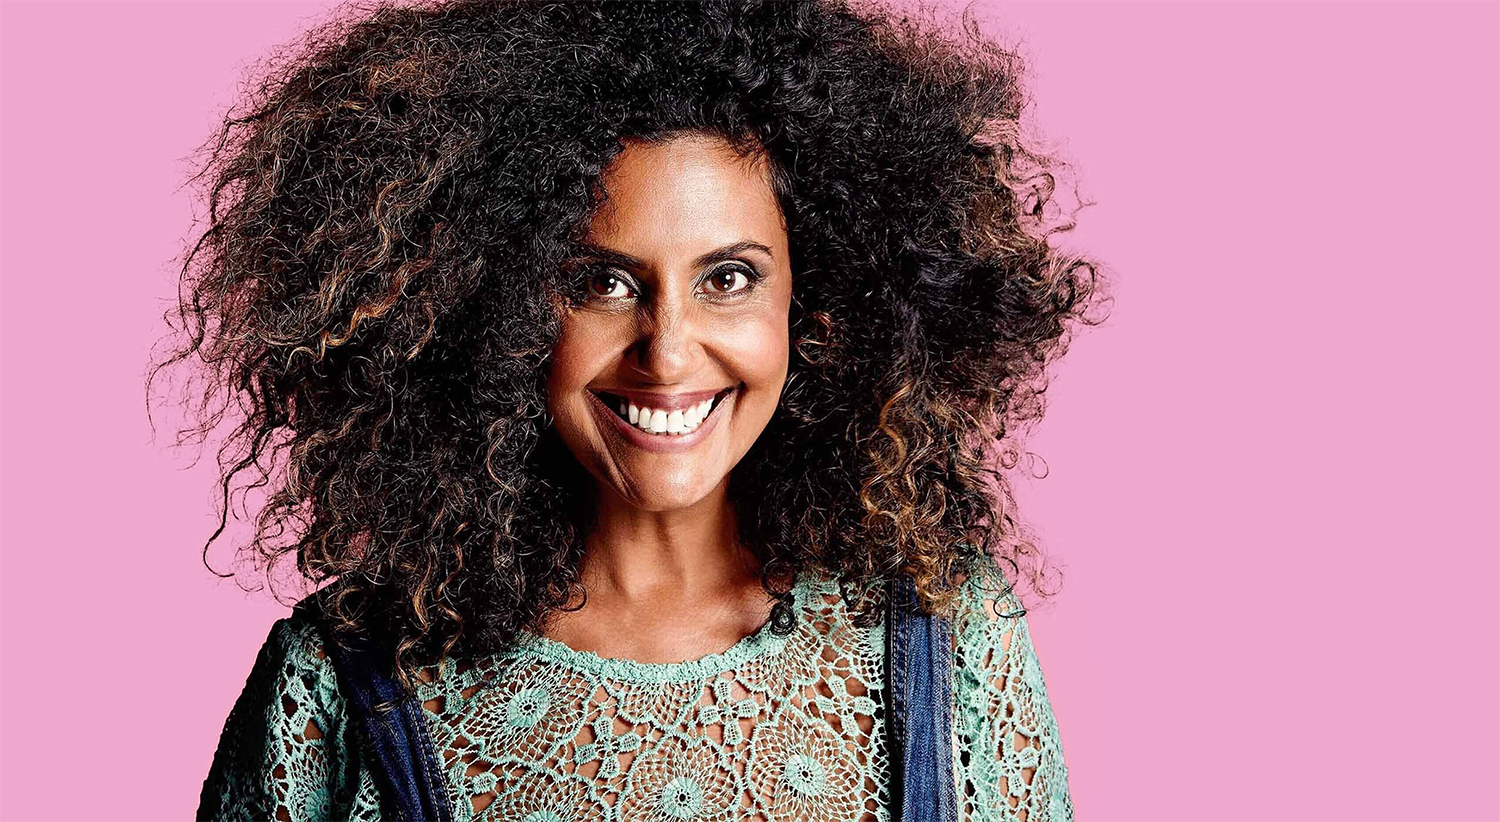 Example image of Natalie Gillespie with an off centre crop.  Natalie has an affro and is wearing overalls against a hot pink background.